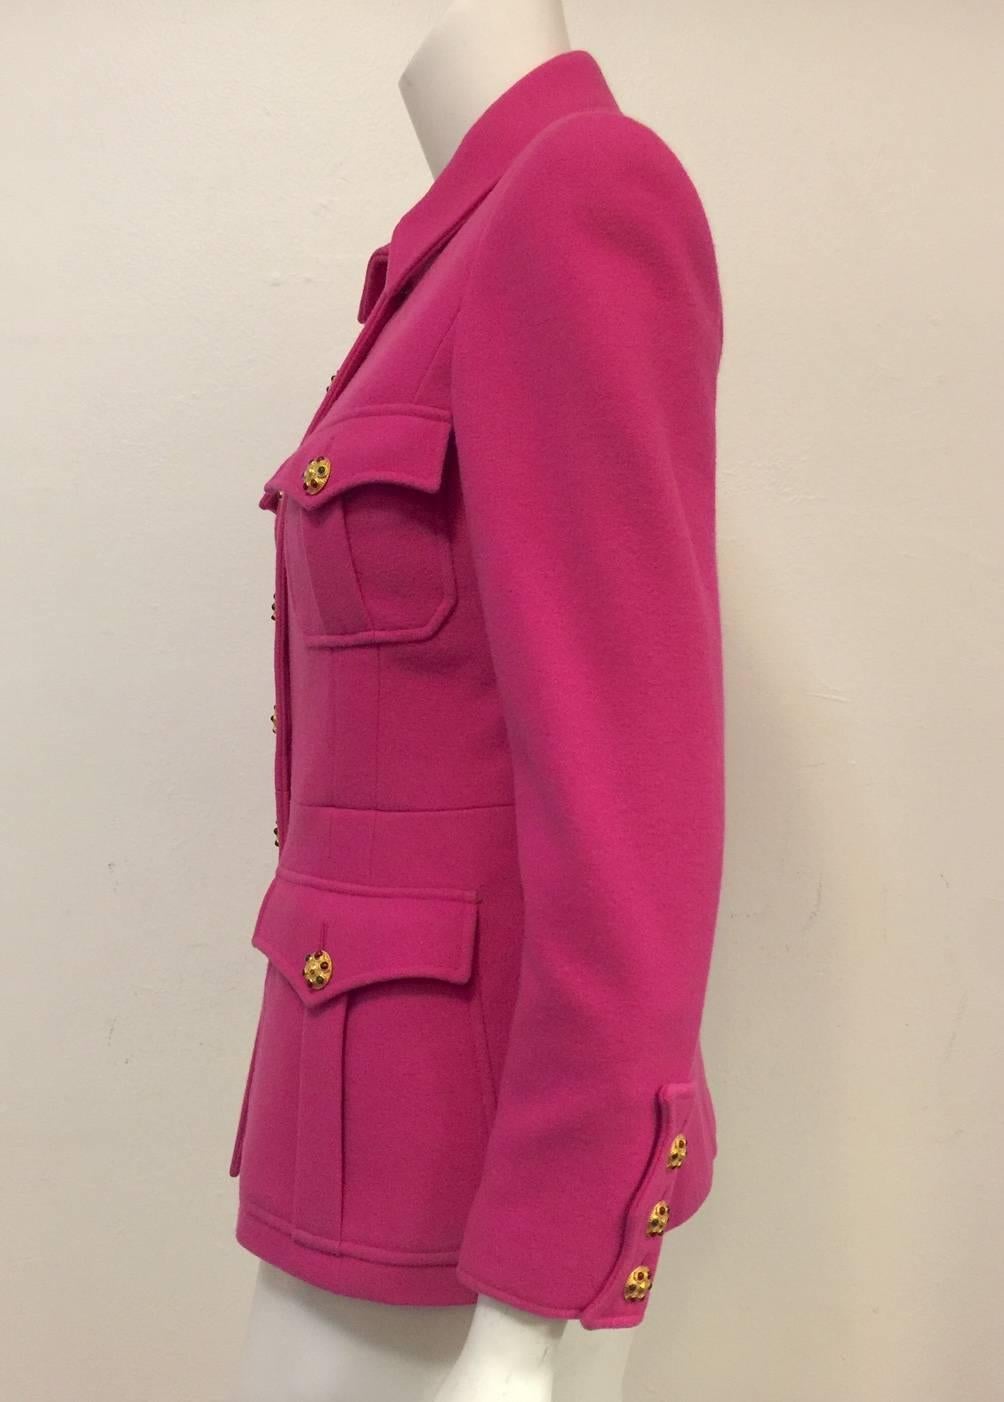 chanel military style fuchsia jacket with gripoix buttons